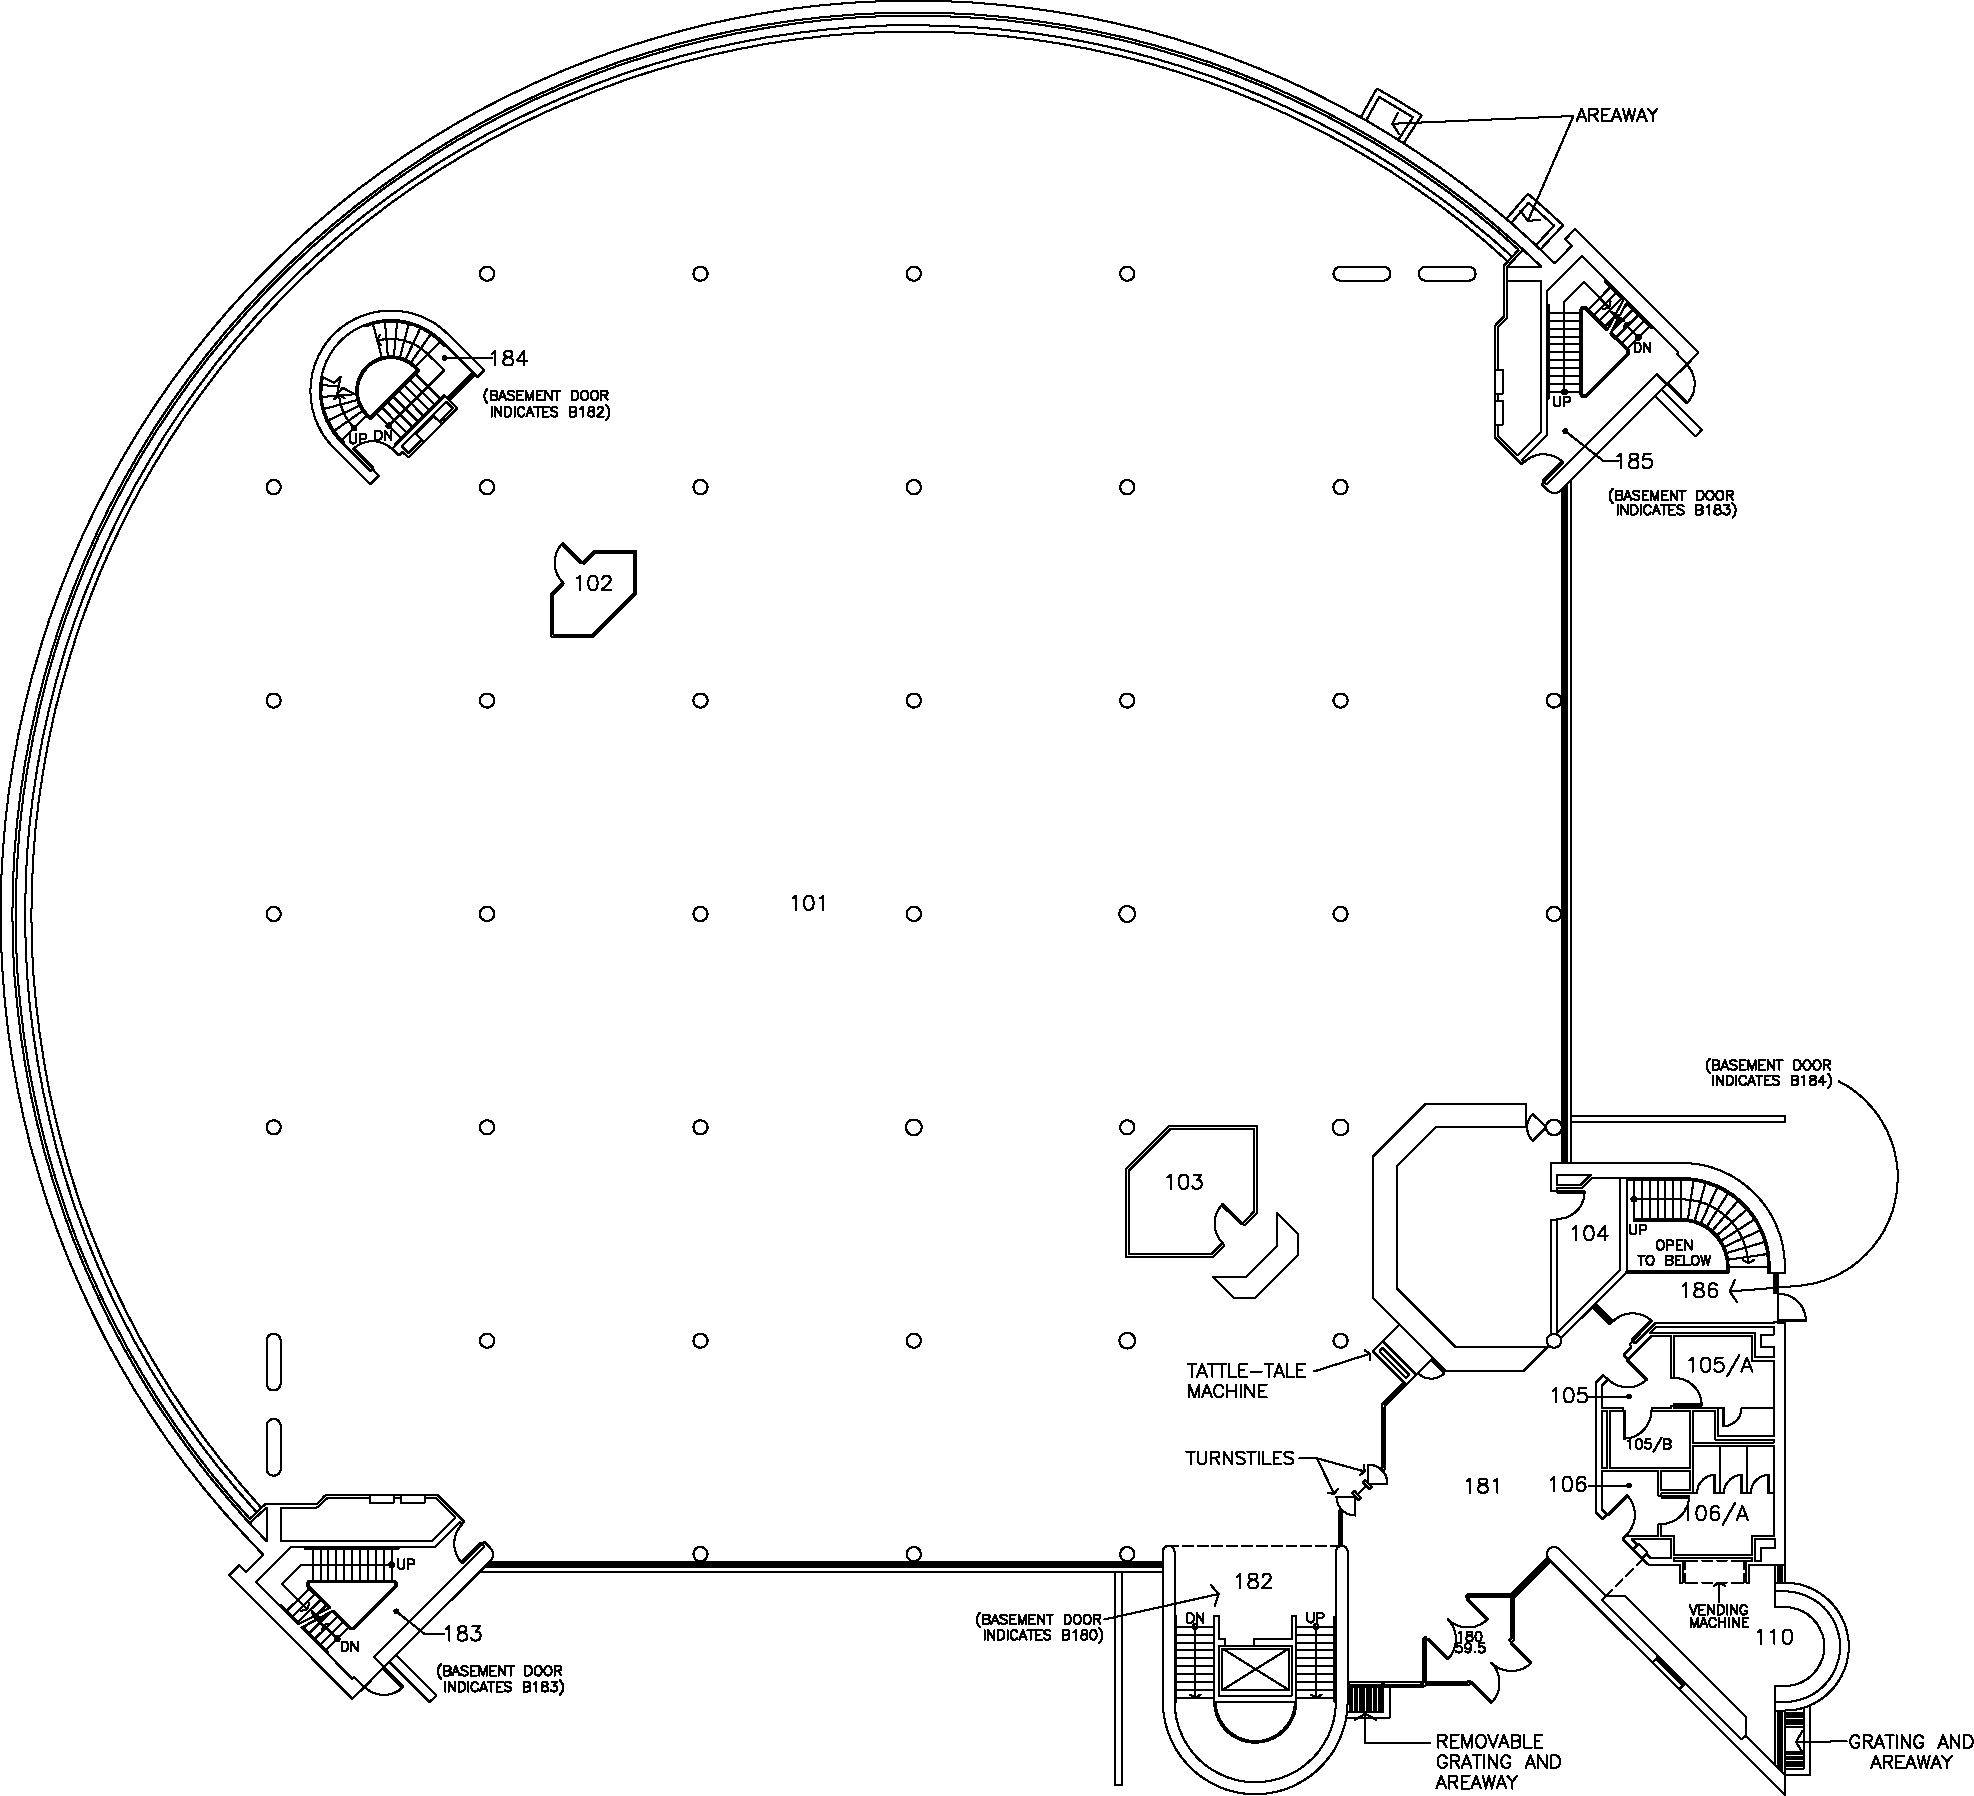 HG Thode Library - First Floor Map